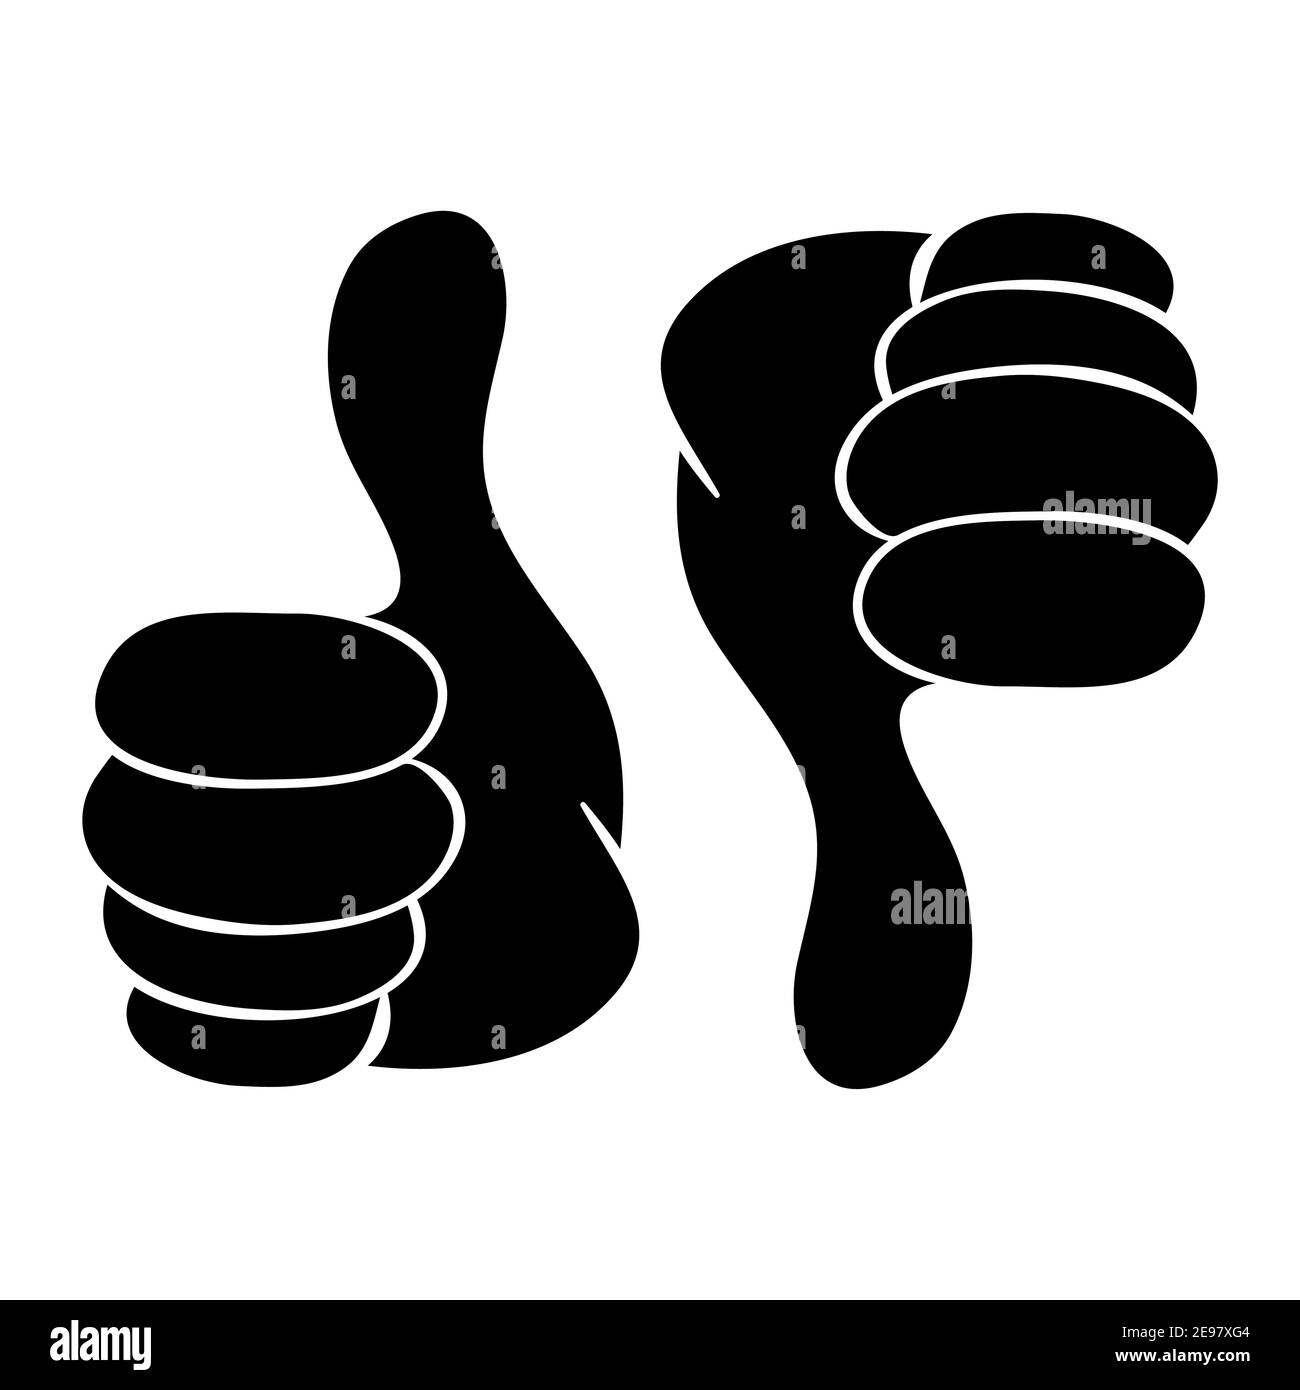 Thumb up and down silhouette icon. Black shape symbol of OK or not OK expression. LIKE or DISLIKE - social media reaction. Vector design isolated on w Stock Vector